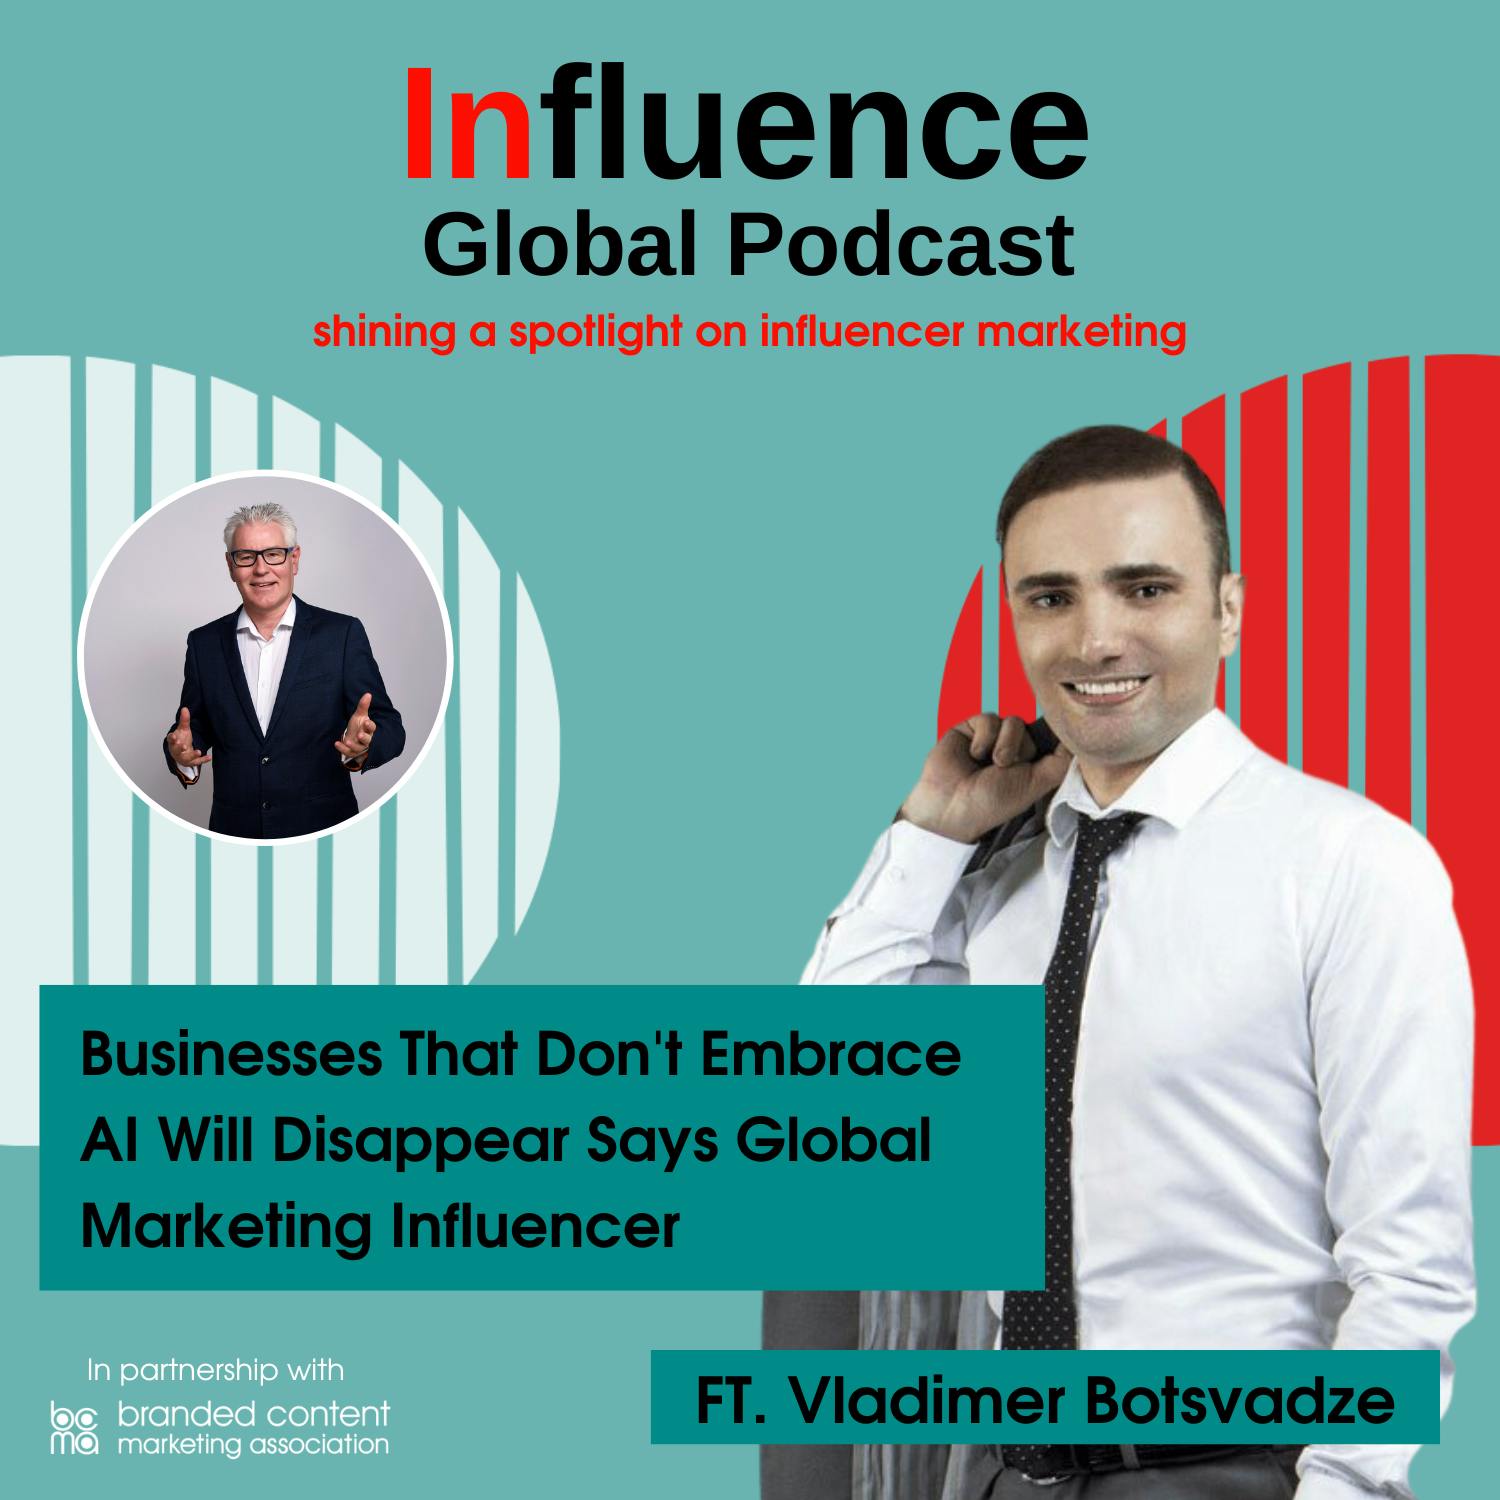 S6 Ep1: Businesses That Don't Embrace AI Will Disappear Says Global Marketing Influencer